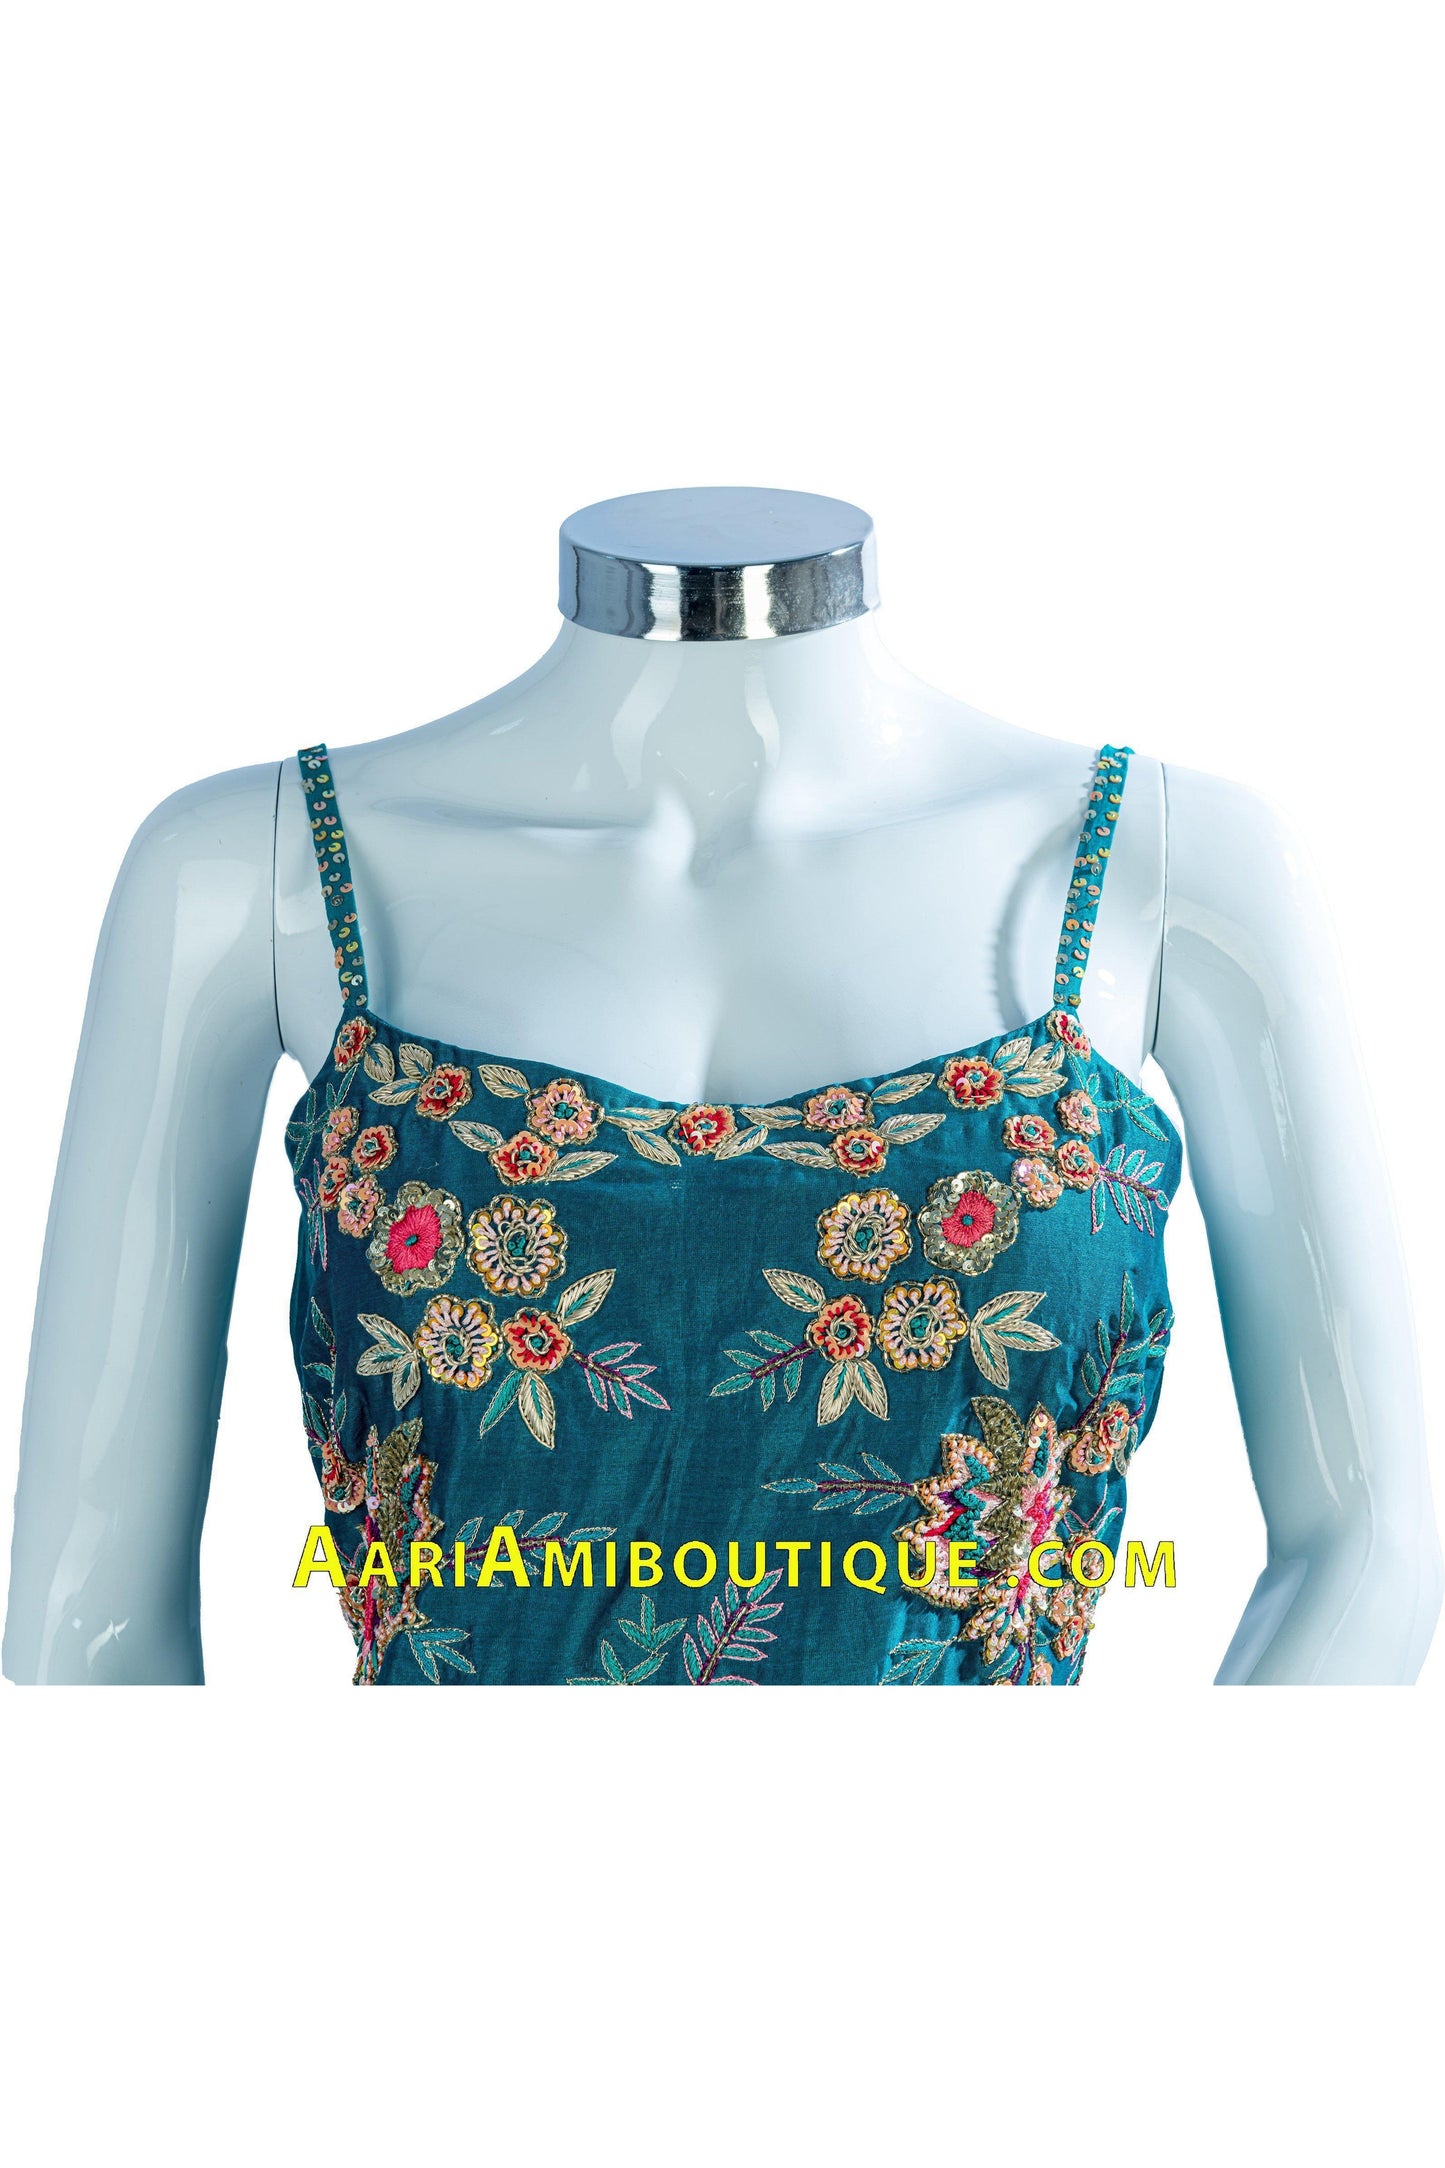 Teal Embroidered Gharara Set with Choker Dupatta-AariAmi Boutique